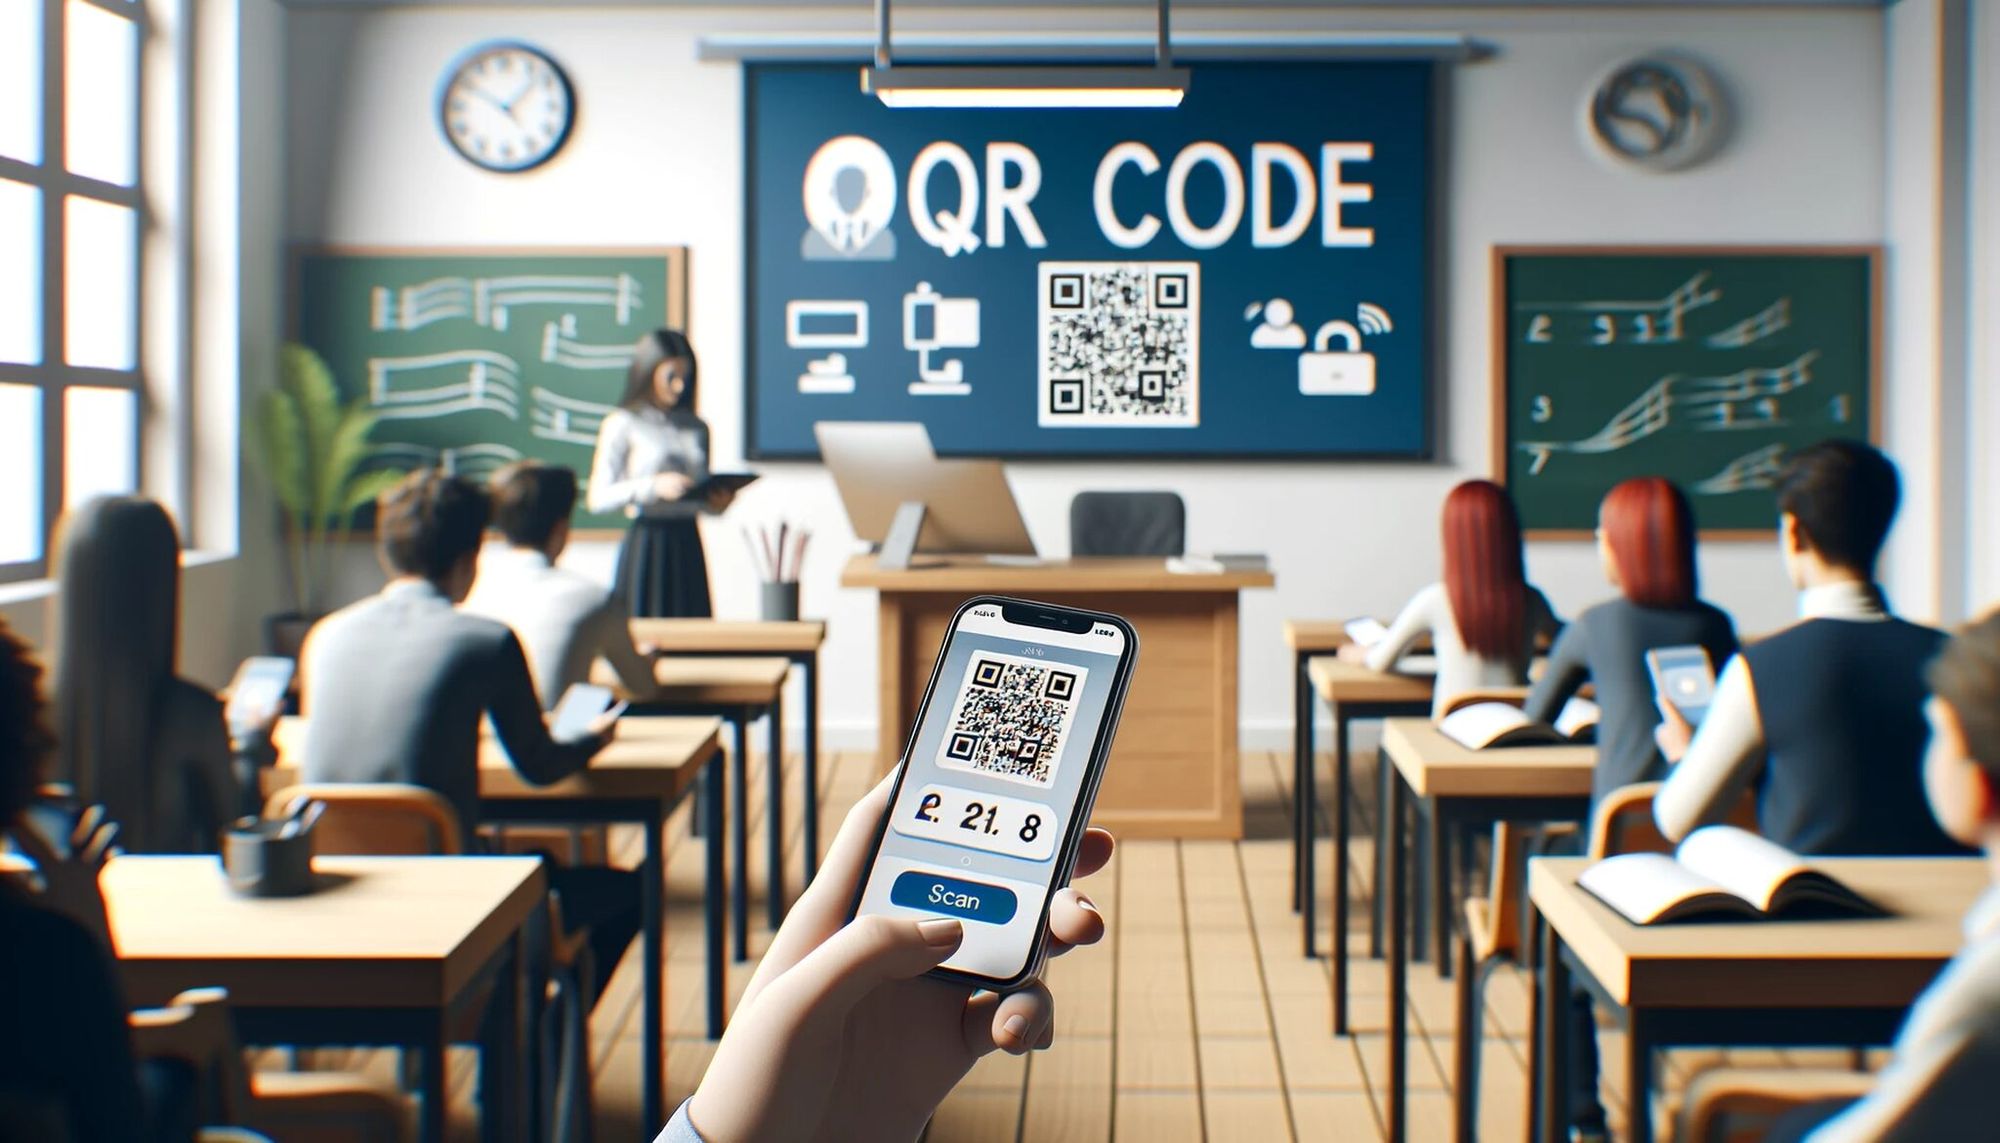  classroom with students and a qr code for attendance on the board